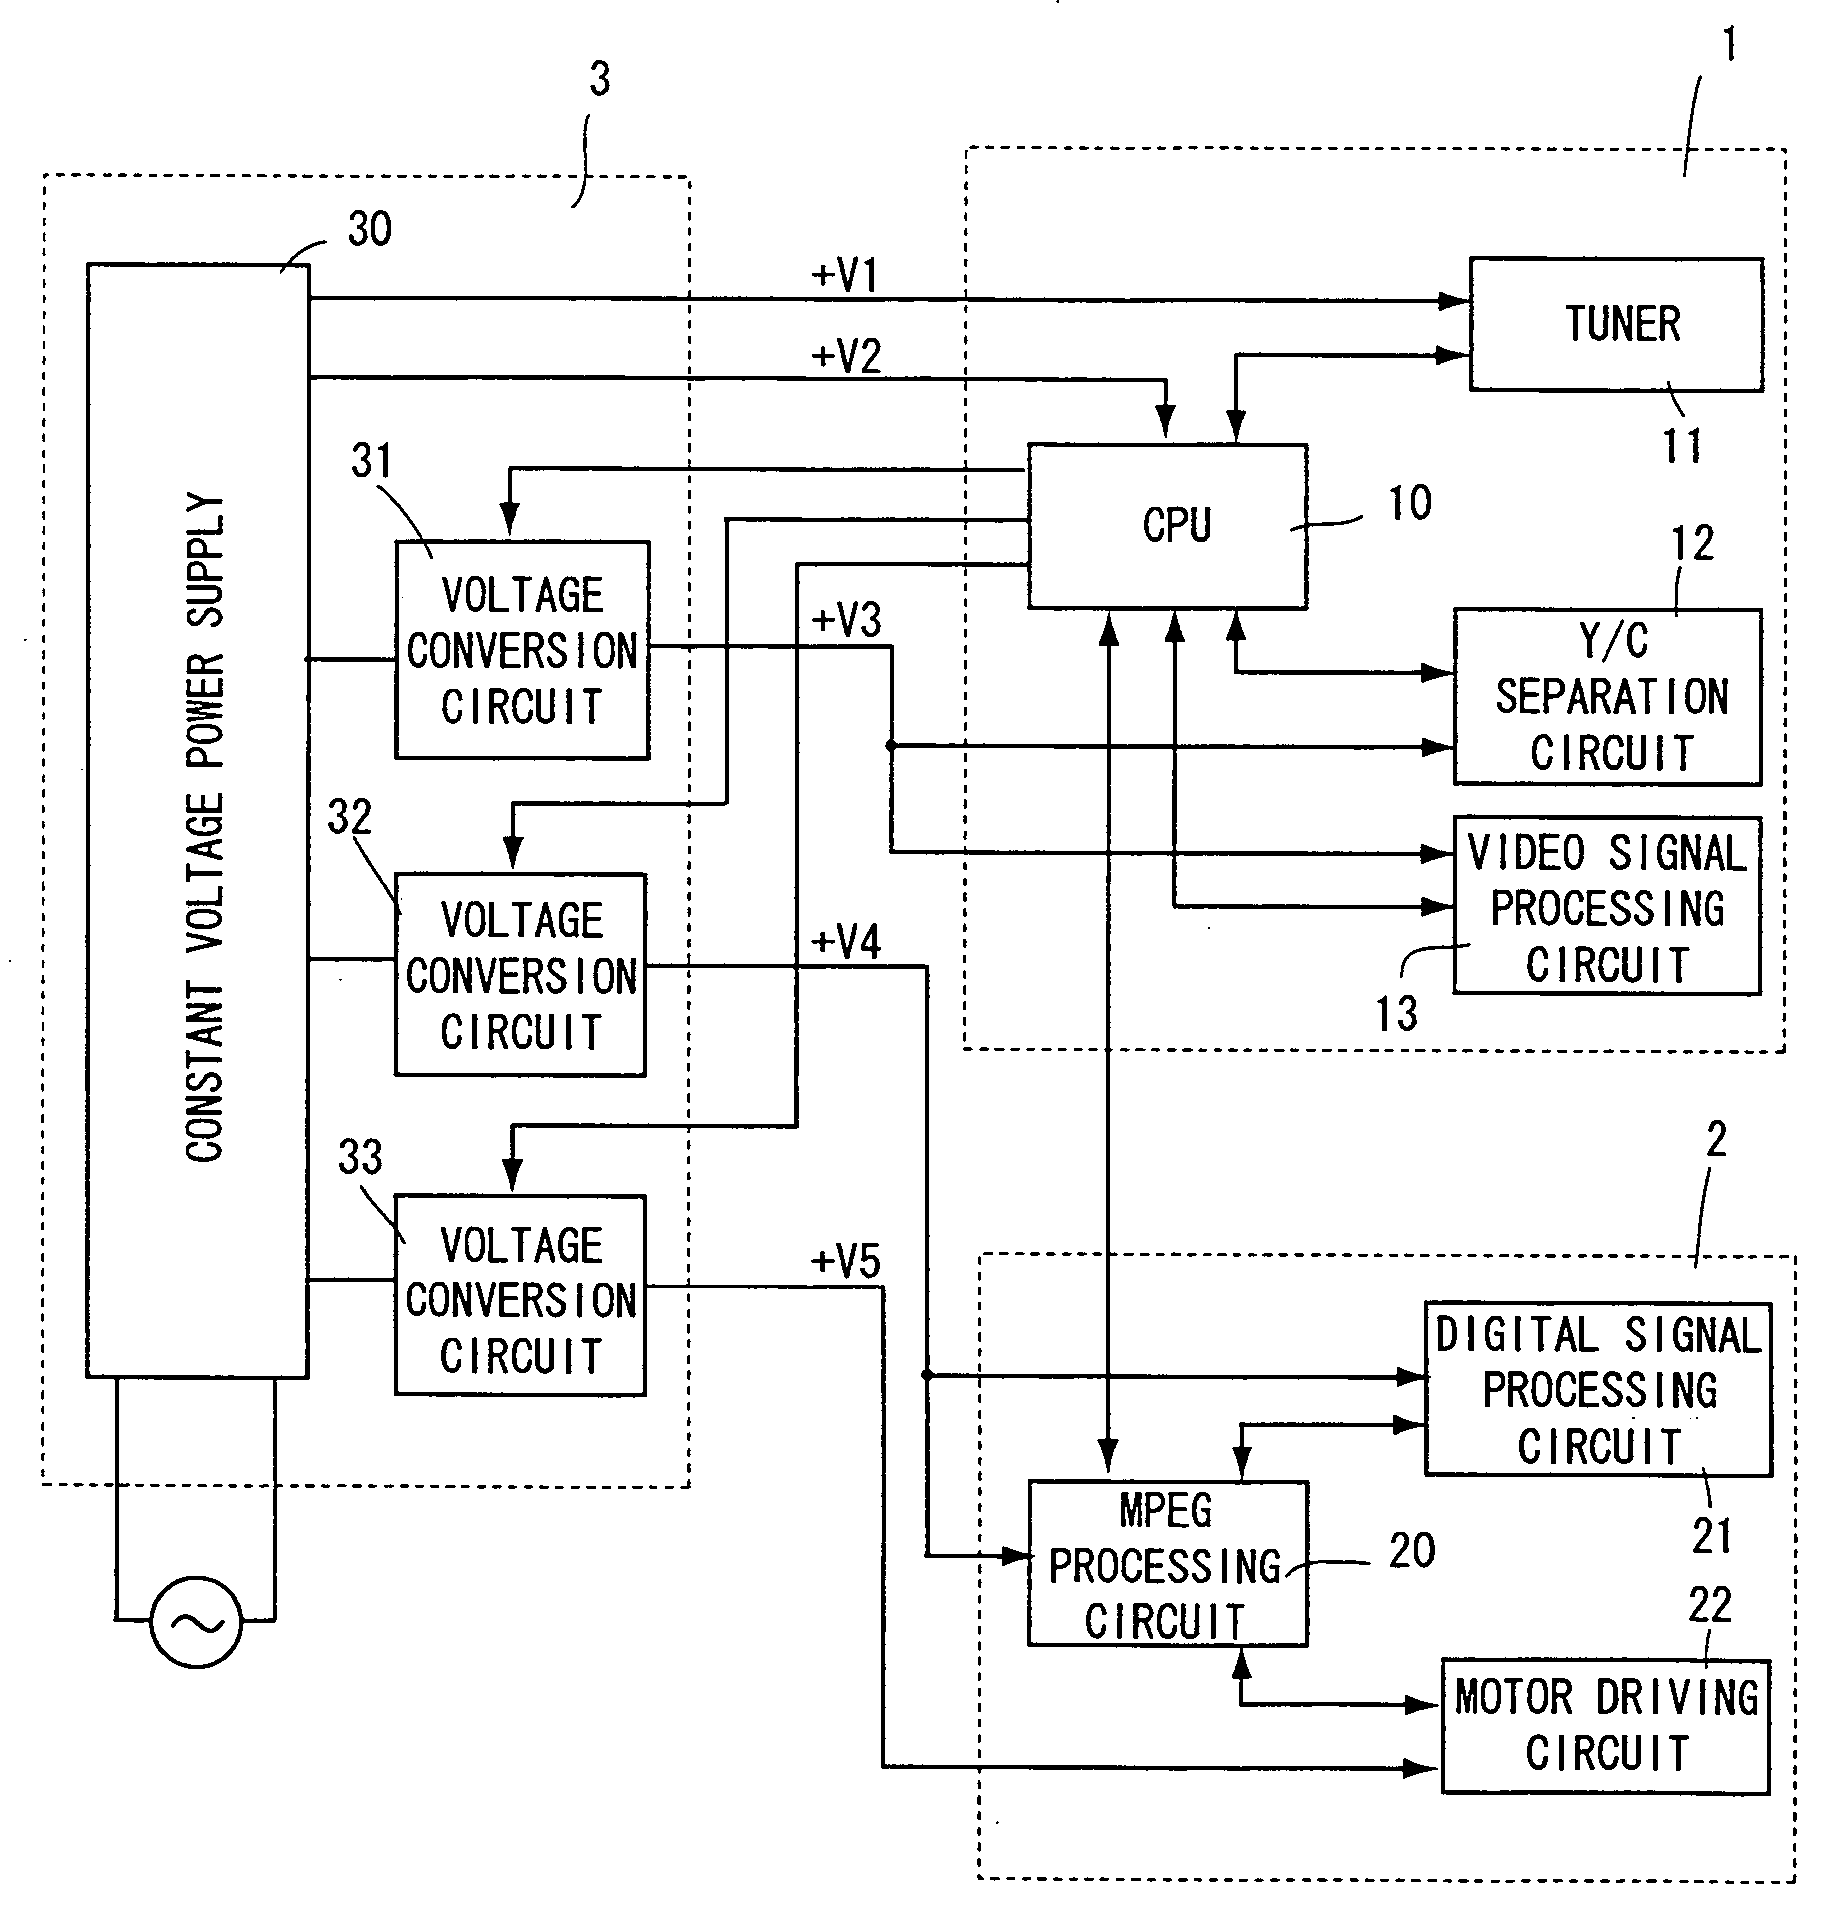 Power controller of combined electronic equipment